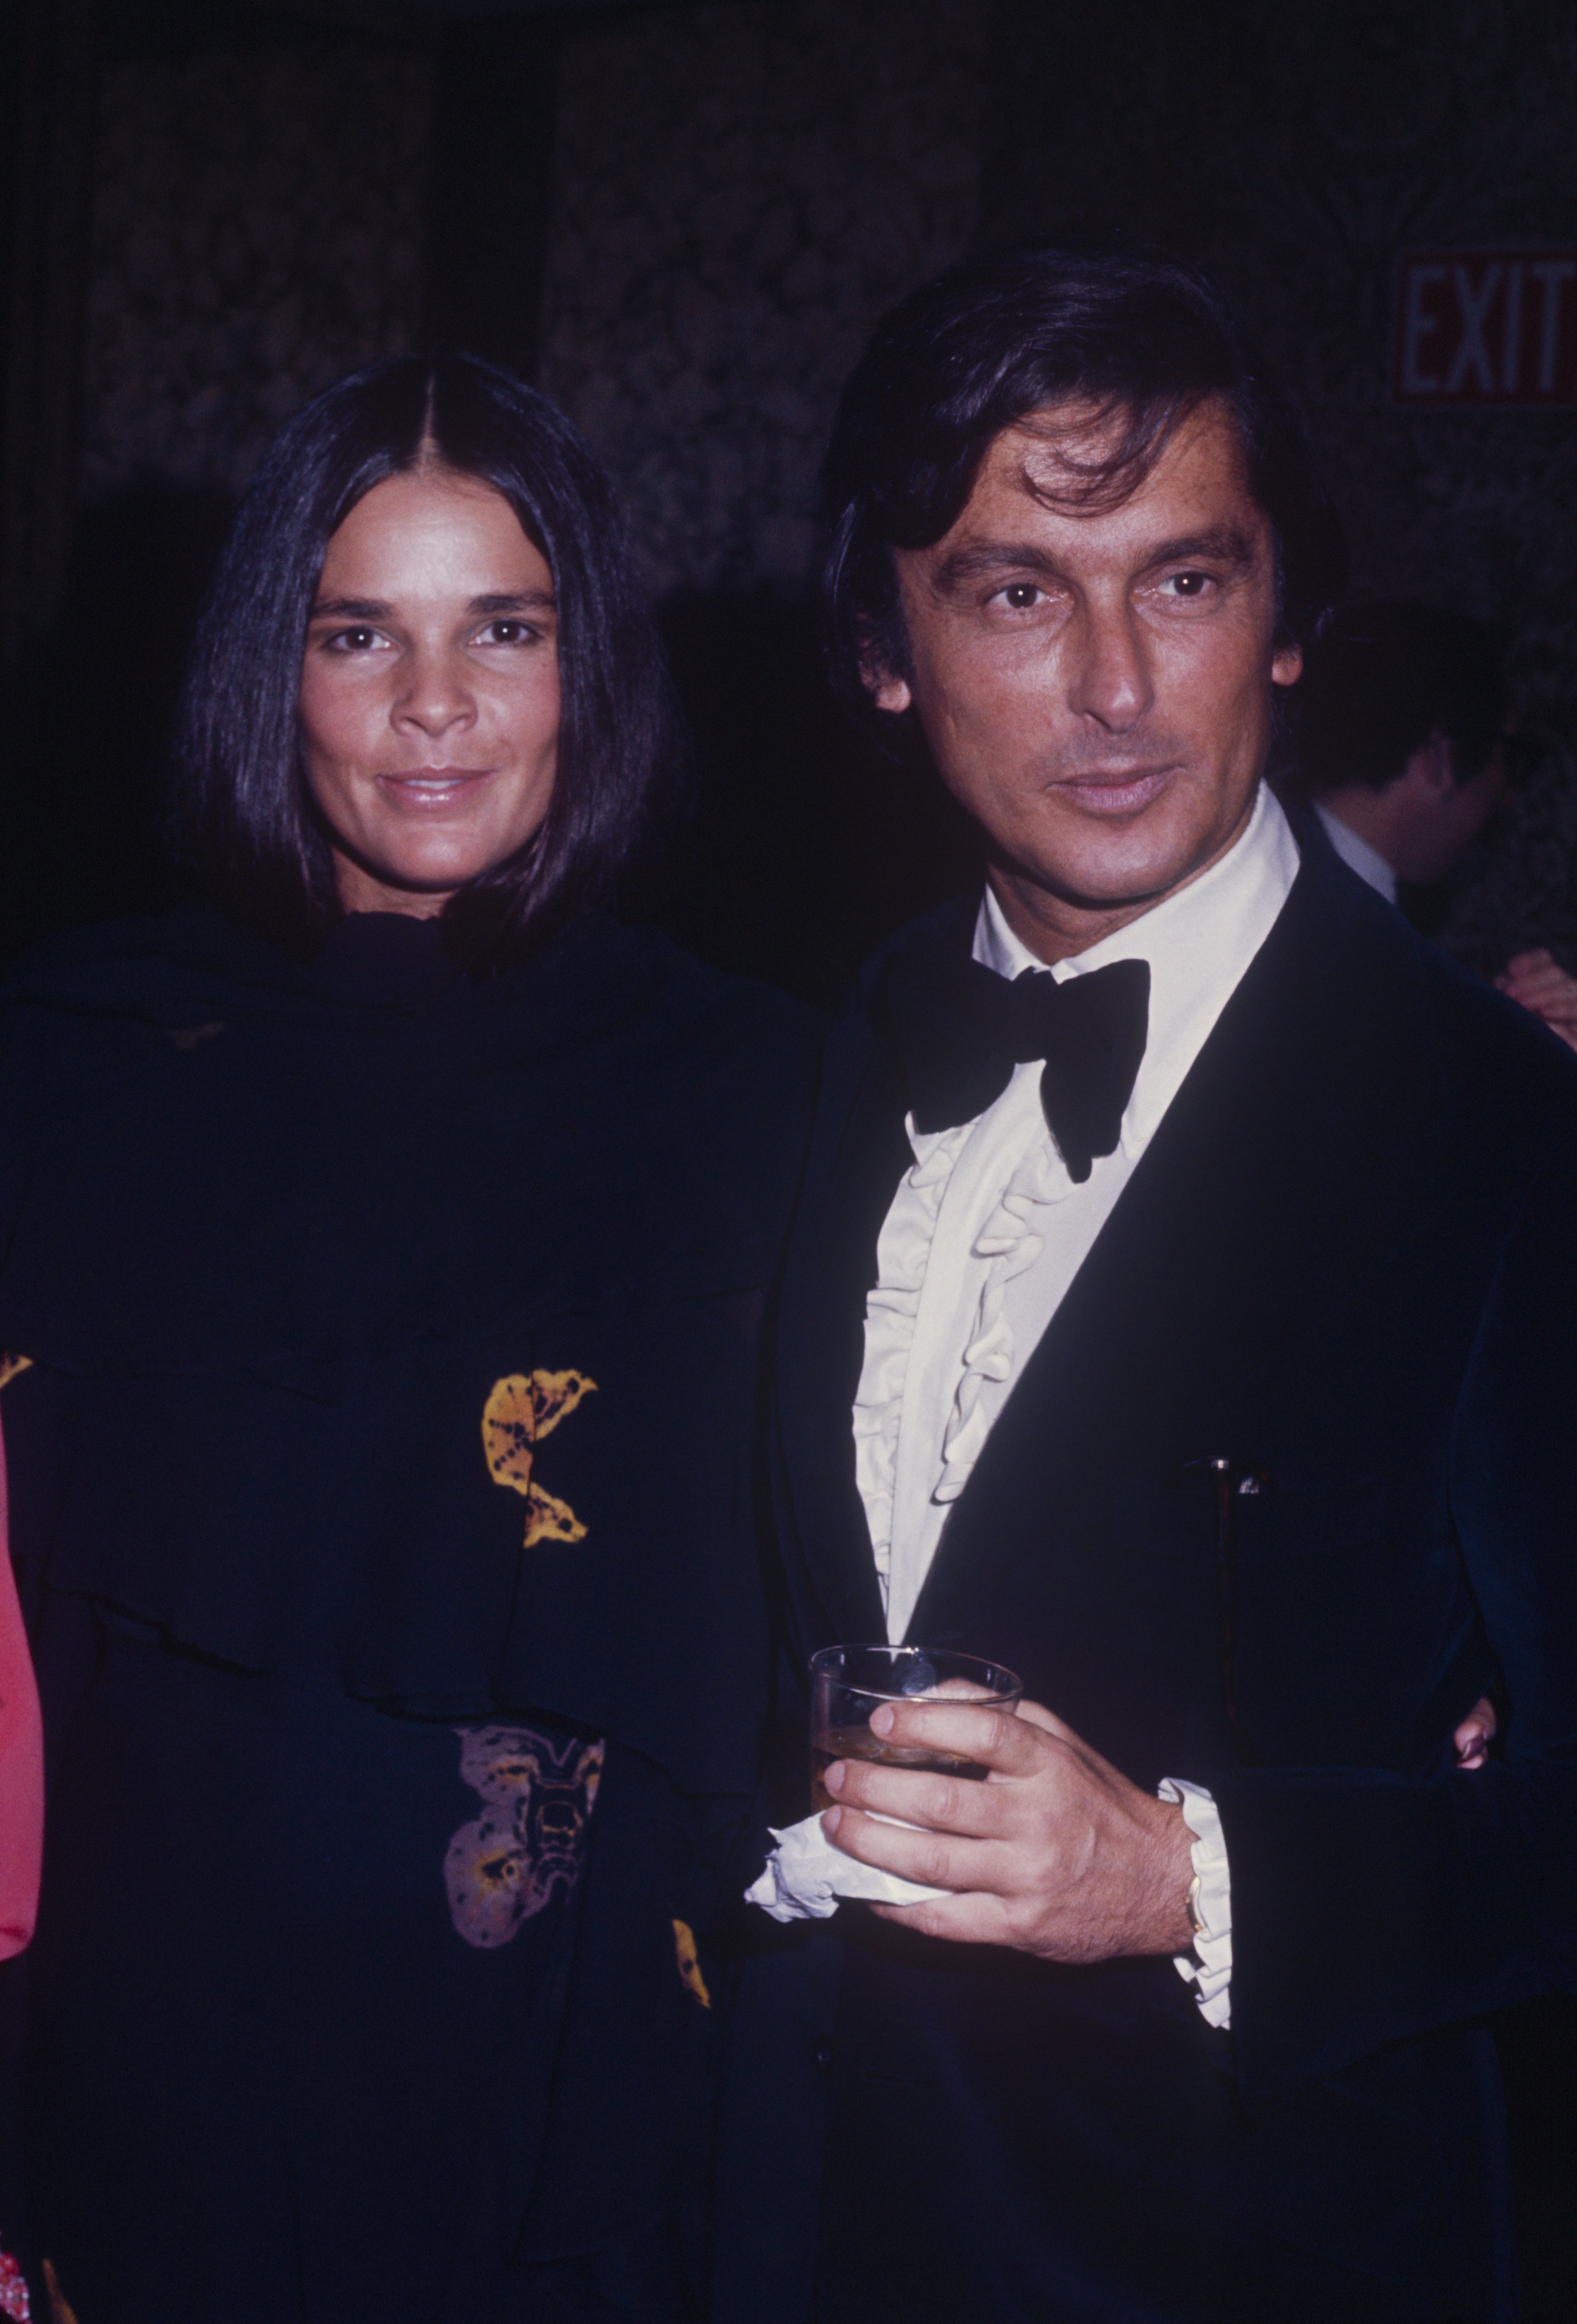 Film producer Robert Evans with his wife activist Ali McGraw during a formal event in 1970, New York. / Source: Getty Images